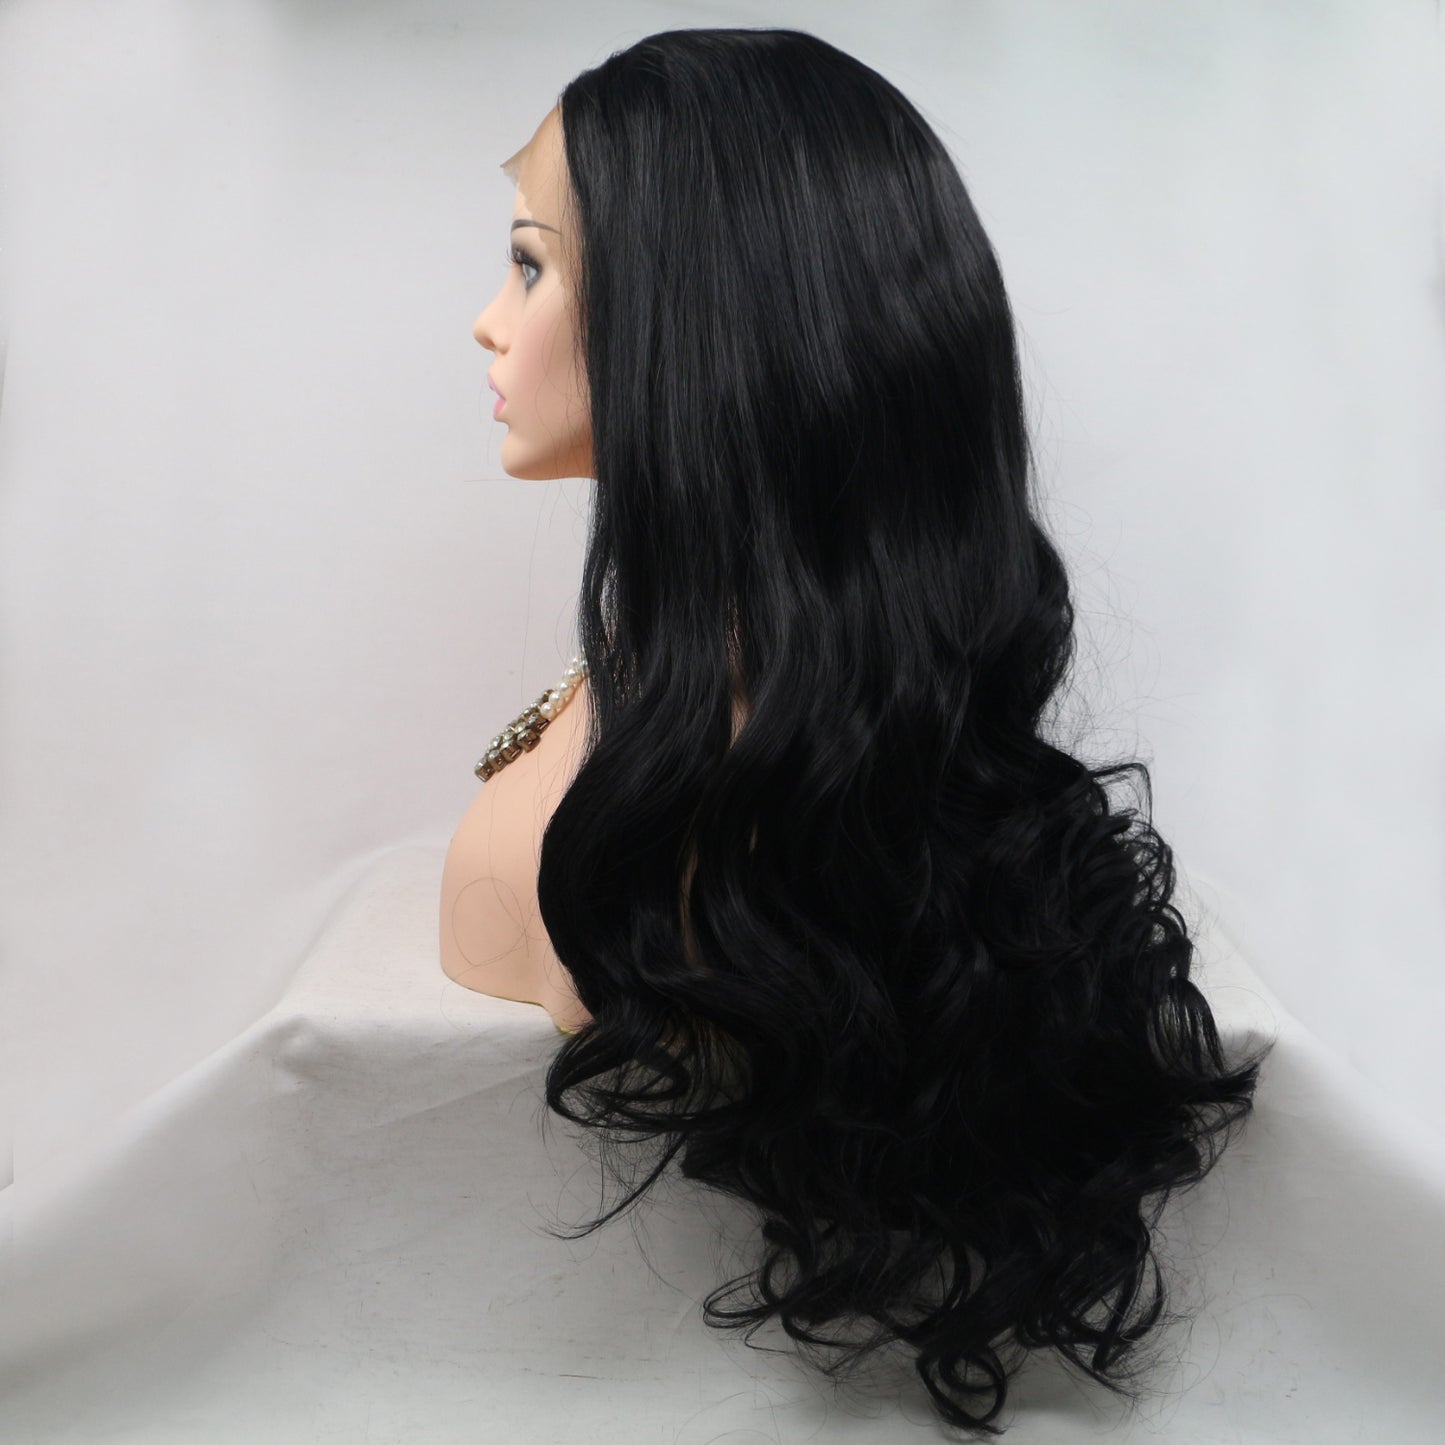 Rayven 13 x 3" Lace Front Wigs Synthetic Long Wavy 24" 130% Density